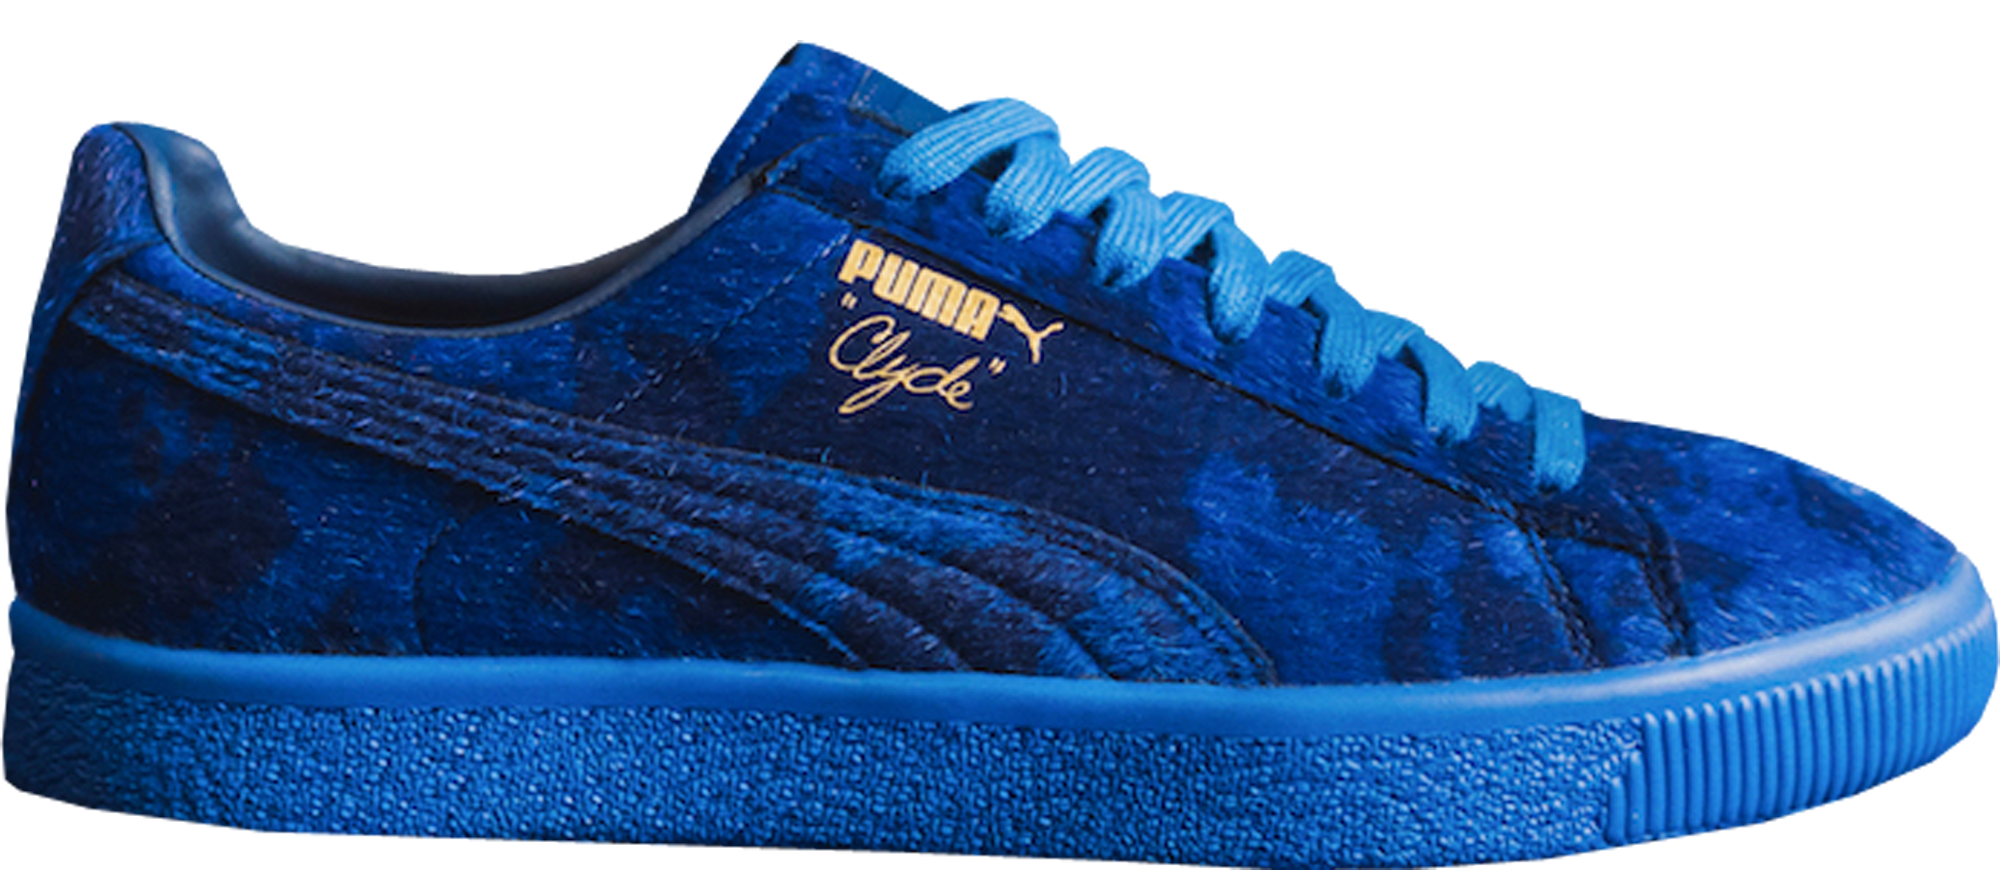 Packer Shoes x Puma Clyde Cow Suit StockX News